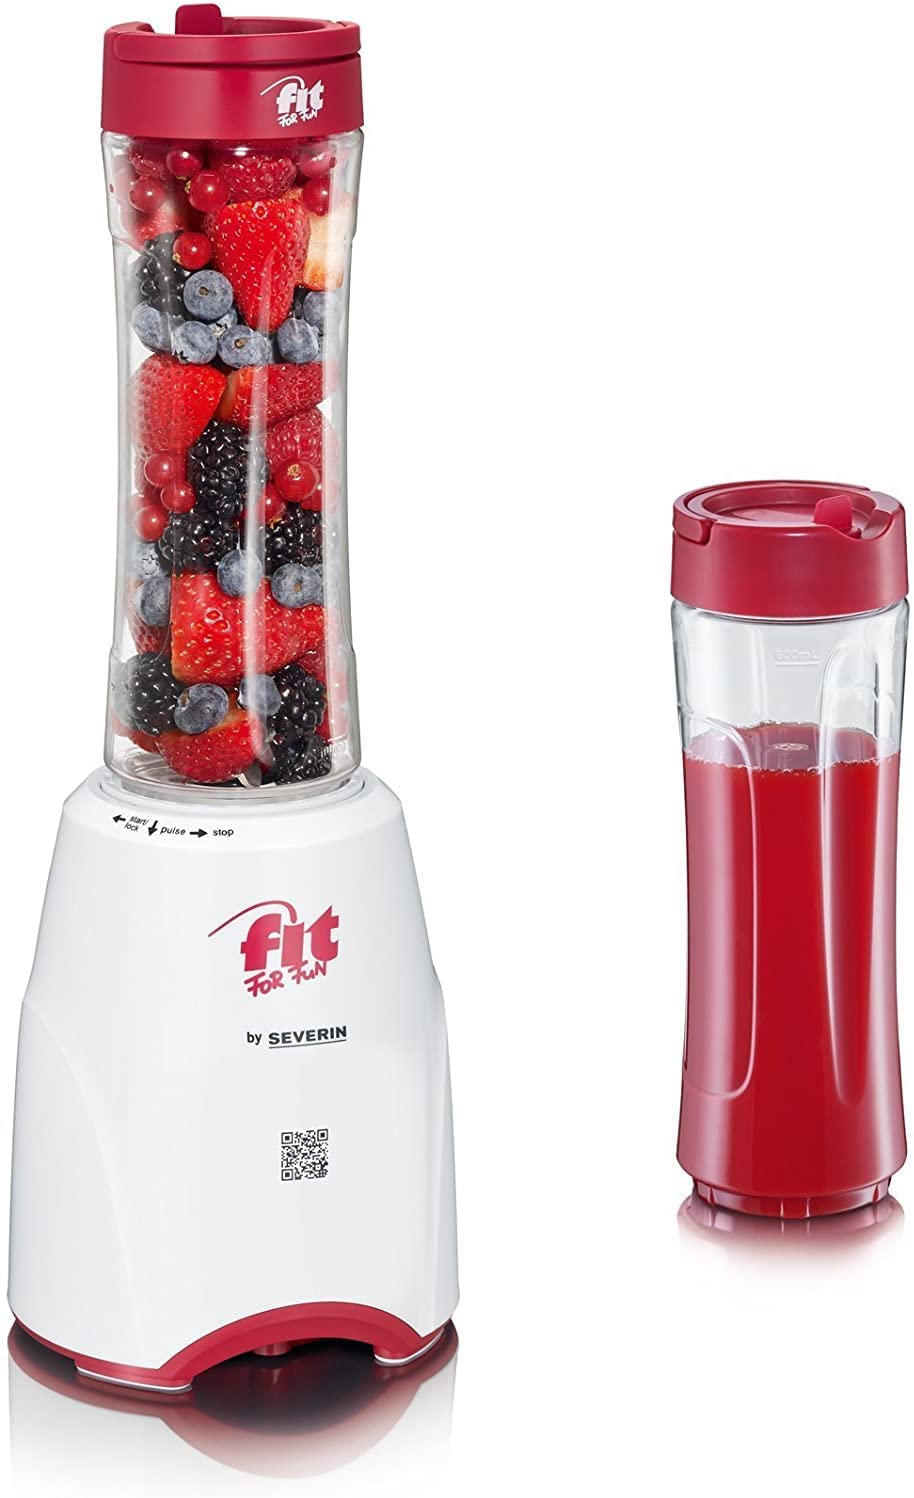 Severin SM 3735 Blender Smoothie Mix and Go Fit For Fun – 600 ml, white/red